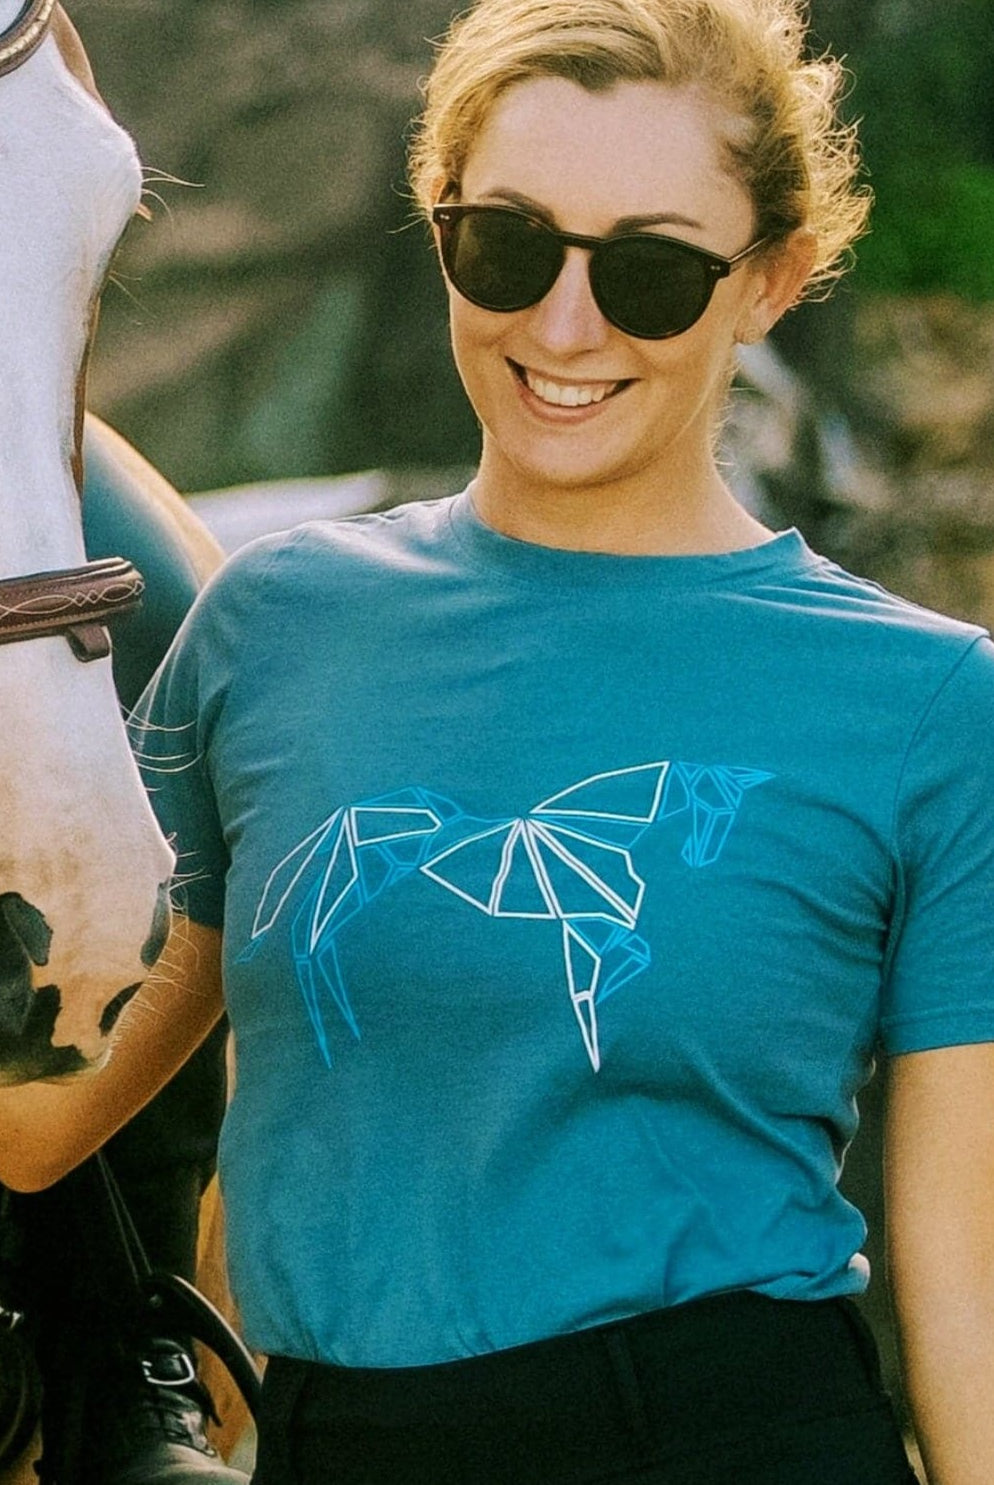 A person with blonde hair wearing sunglasses and a teal Pure Canter Youth PURE Emblem Shirt, featuring a geometric horse design, a true wardrobe staple, stands next to a brown horse with a white stripe on its face. The person is smiling, and the background is outdoors.